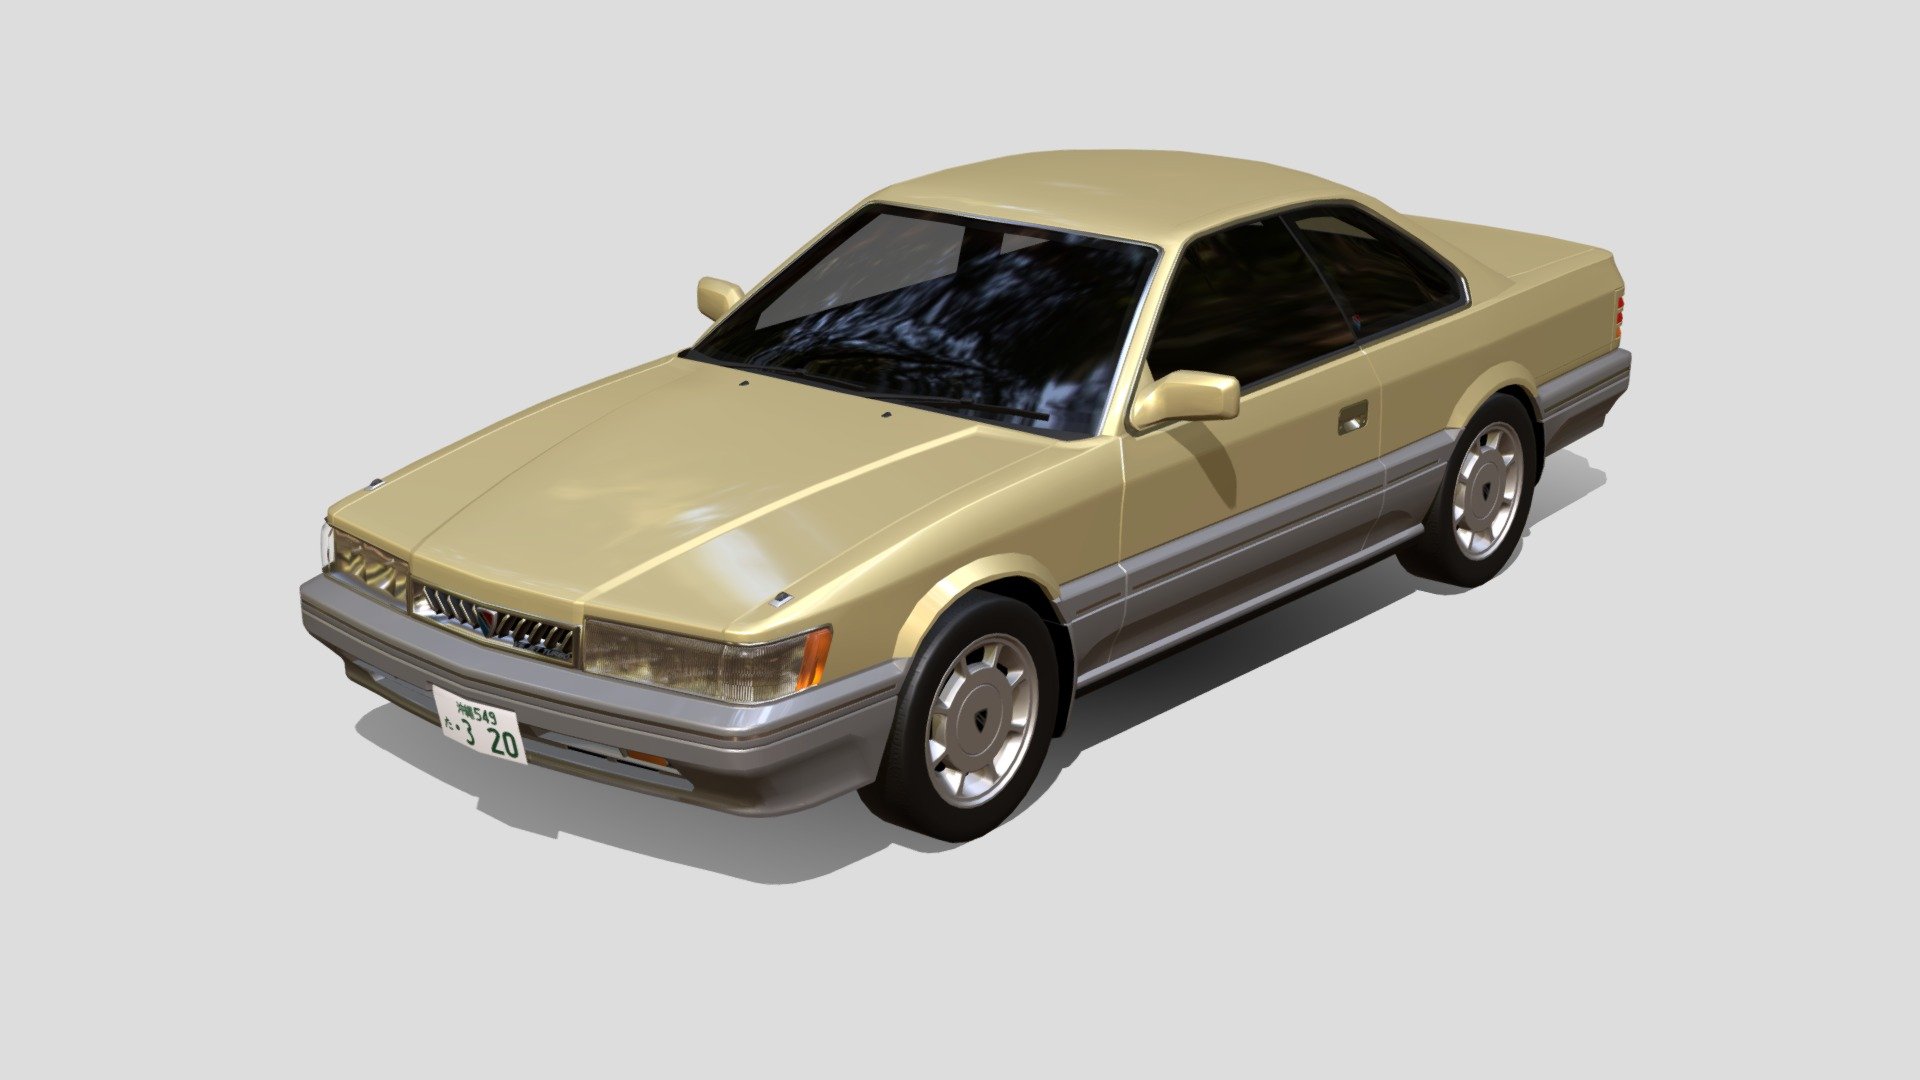 The Nissan Leopard is a luxury grand-tourer made in the late 80's by Nissan motors. It featured a 3.0 V6 Turbo engine! It featured the VG30DET engine from the Z31 300ZX. It also shared a bunch of drivetrain components from the R31 Nissan Skyline! - 1986 Nissan Leopard Ultima - 3D model by Ezo (@EzoYEAHH) 3d model